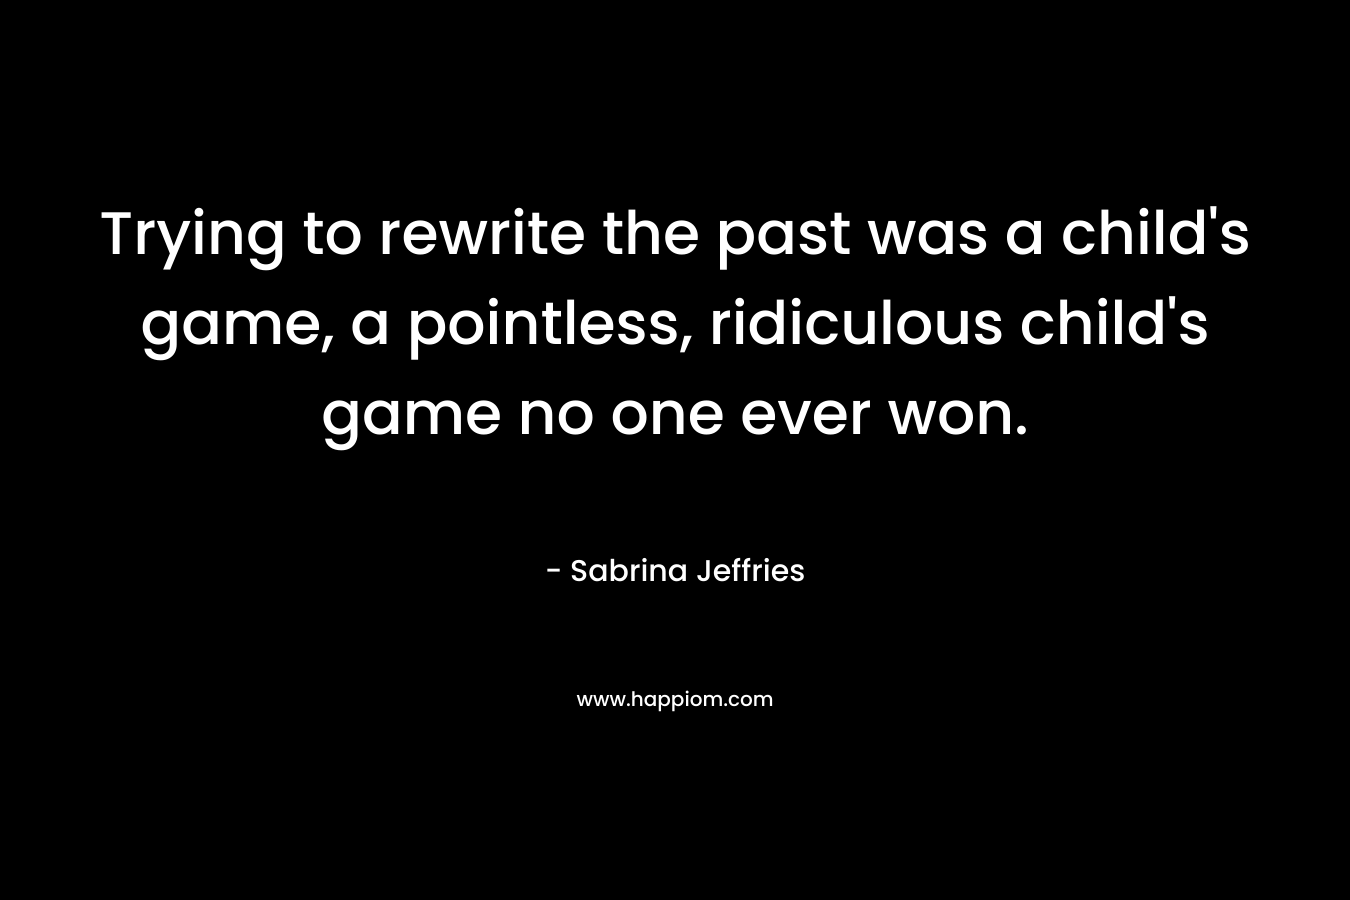 Trying to rewrite the past was a child’s game, a pointless, ridiculous child’s game no one ever won. – Sabrina Jeffries